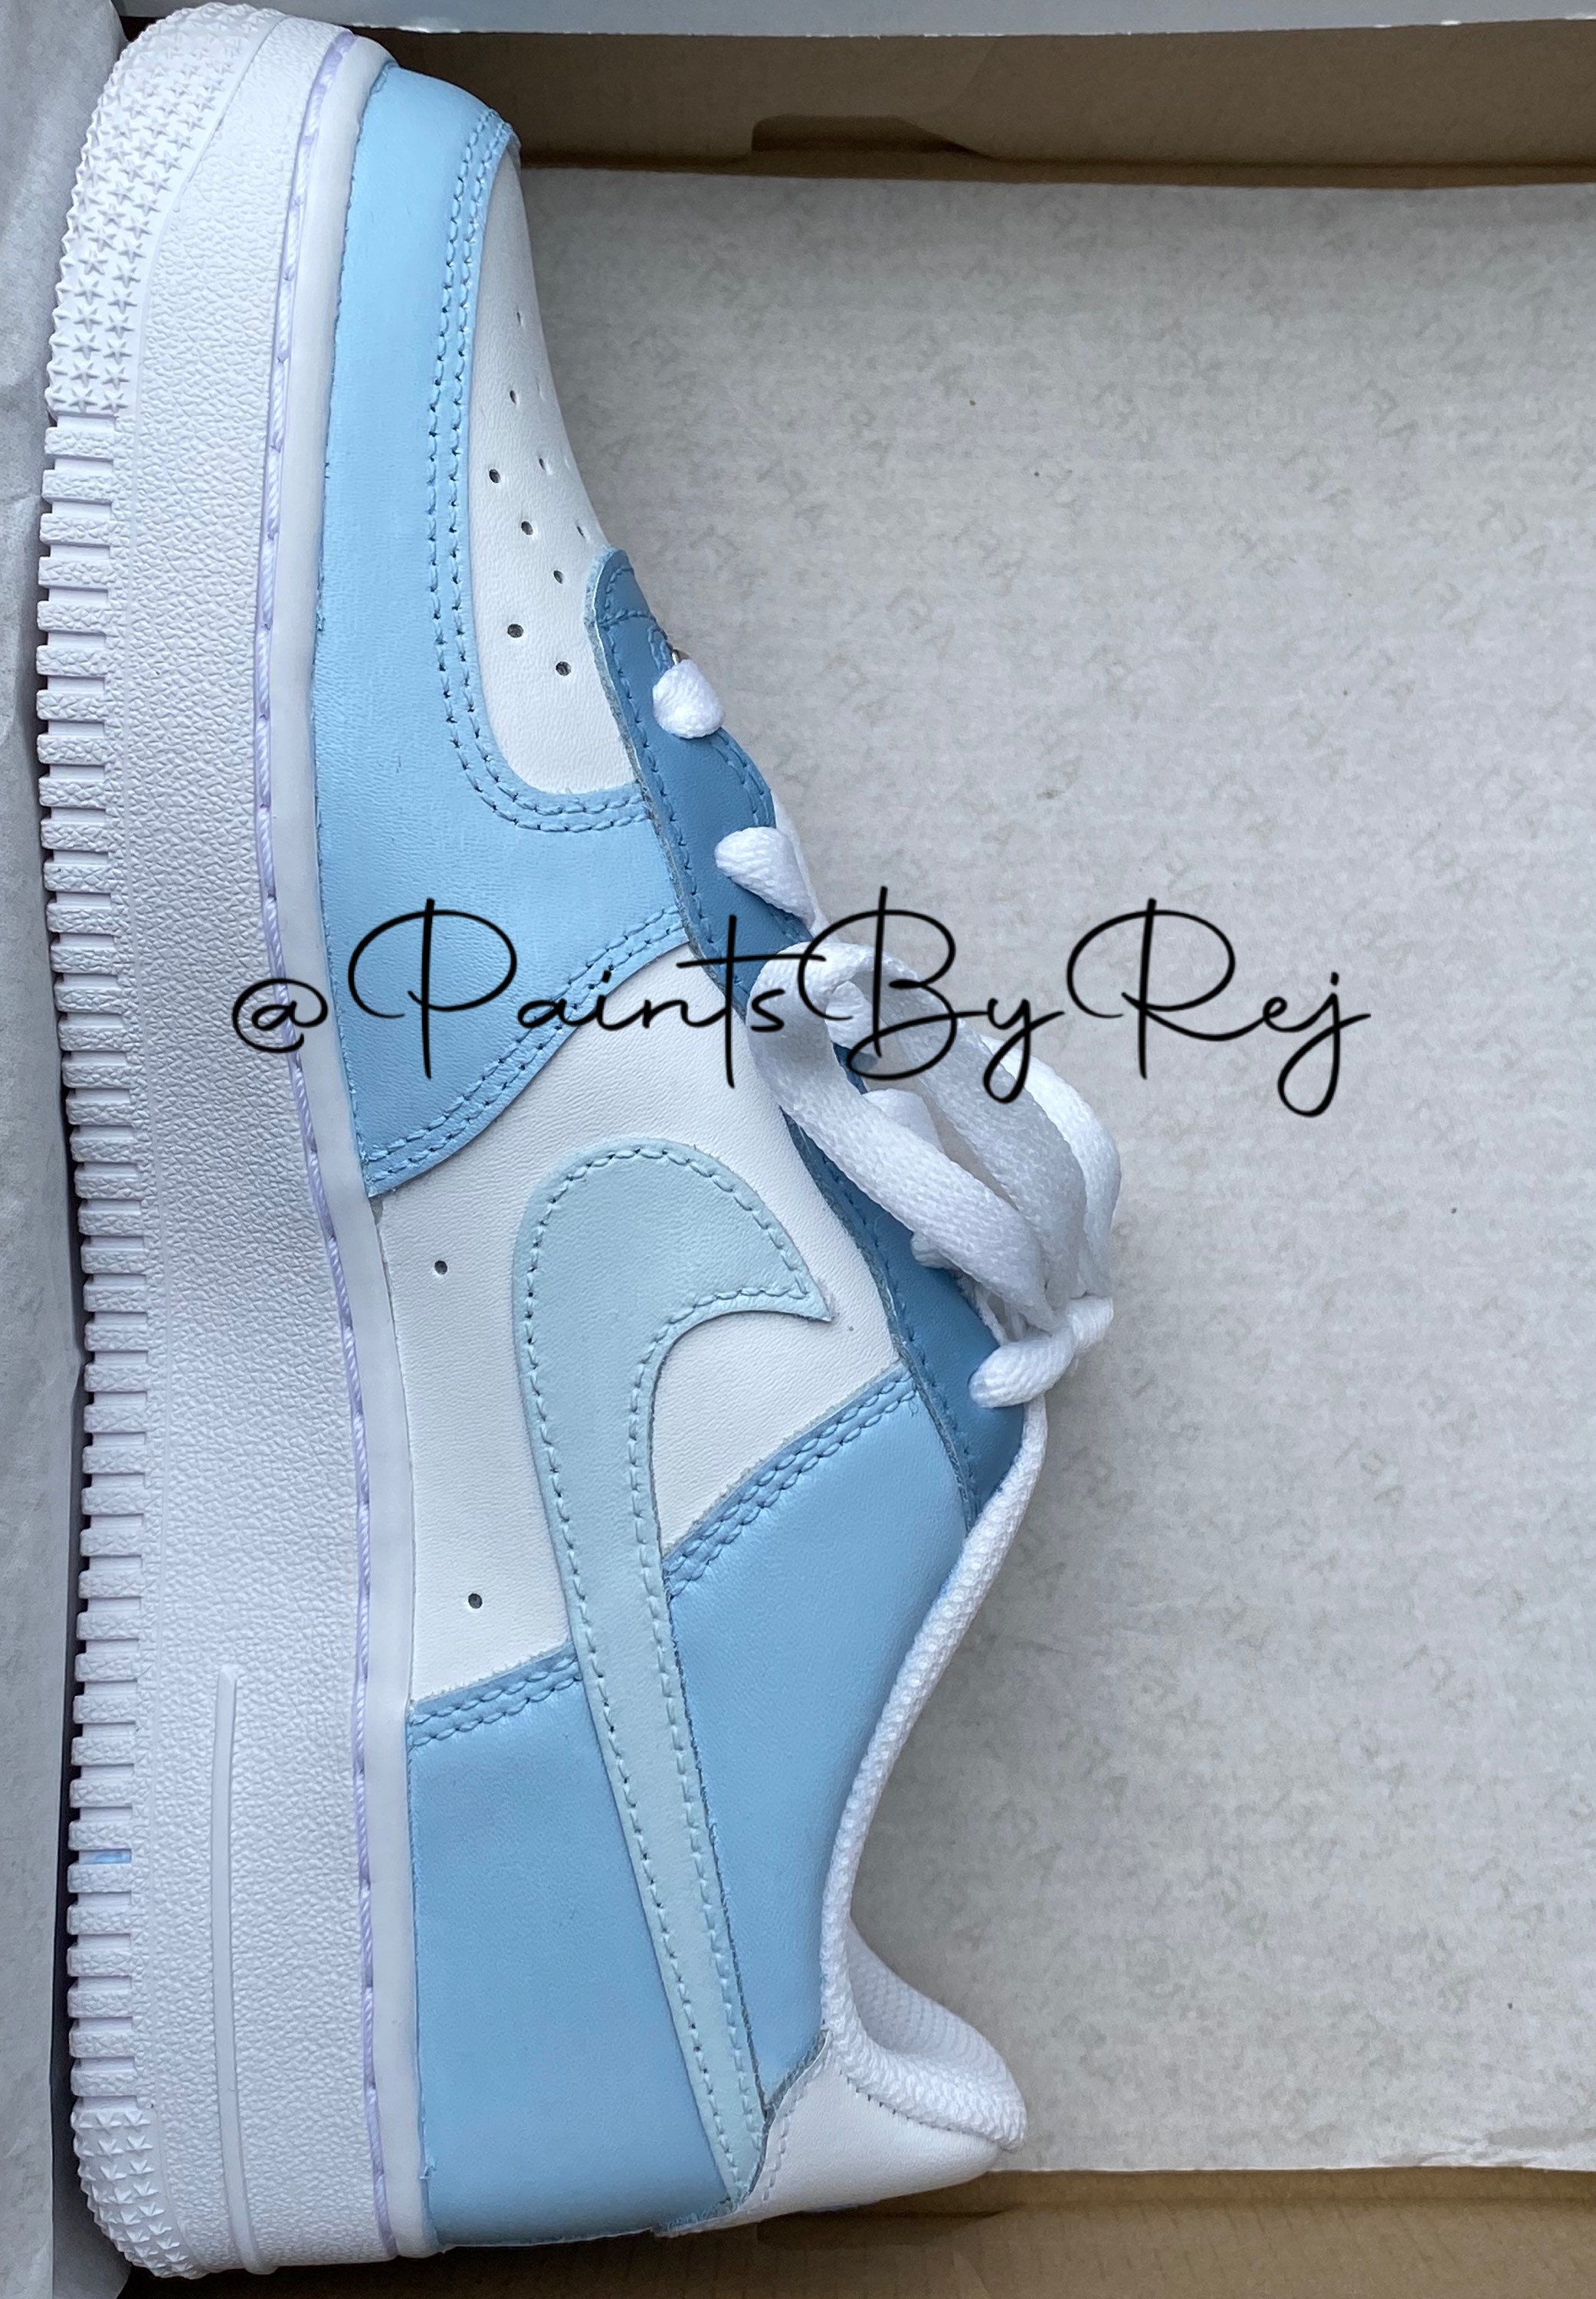 sky blue and white air force ones